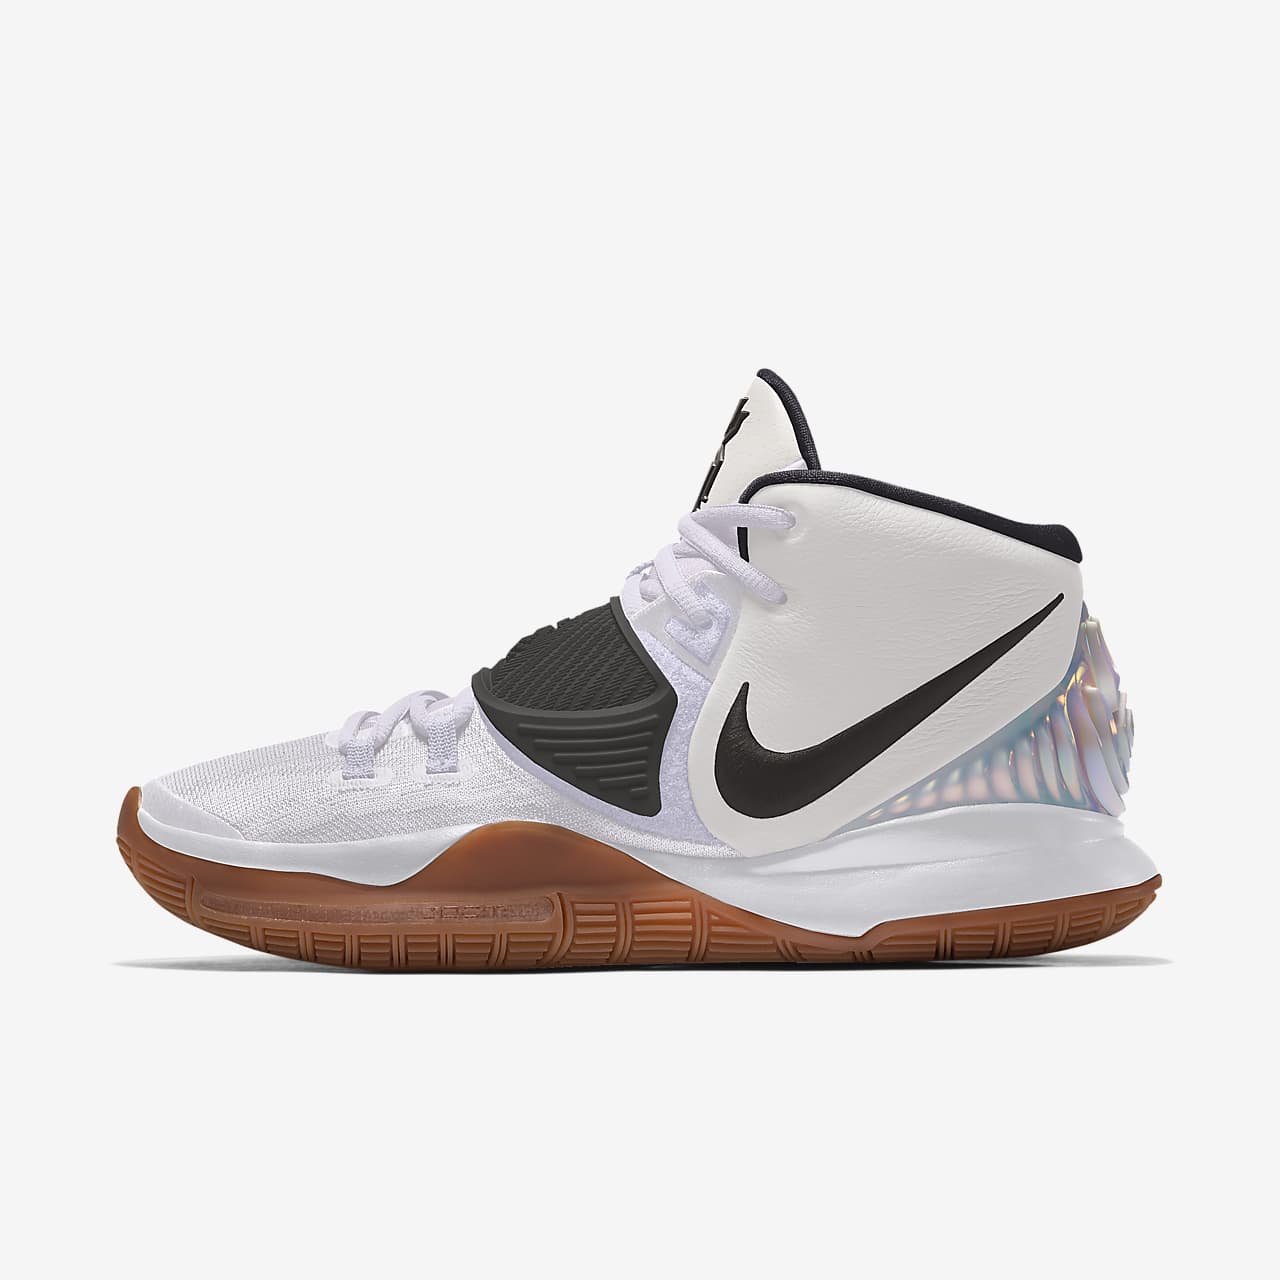 kyrie low top basketball shoes buy 